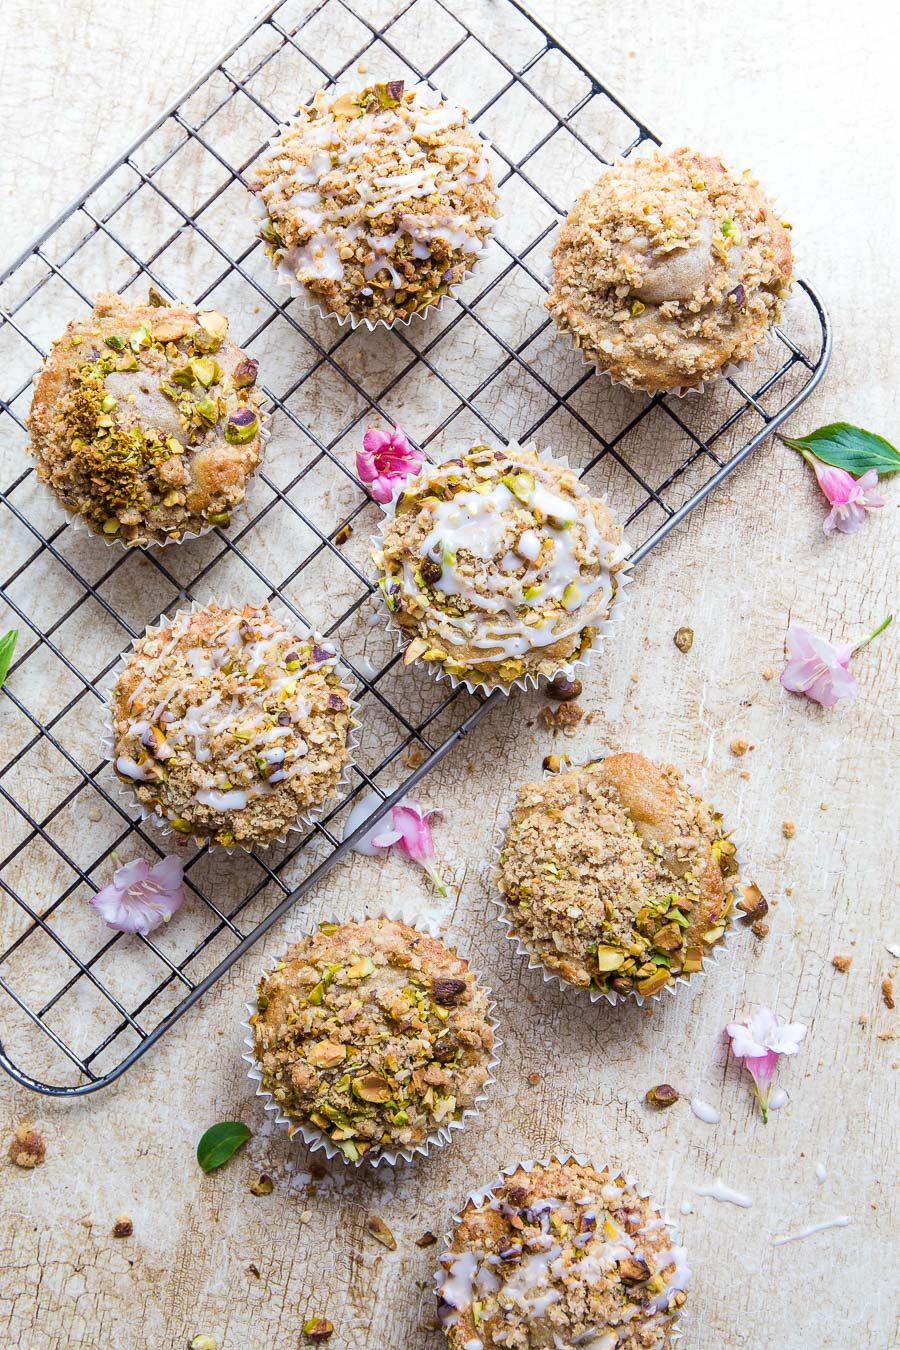 Flat lay of muffins topped with nuts on a textured background with a cooling rack and edible flowers